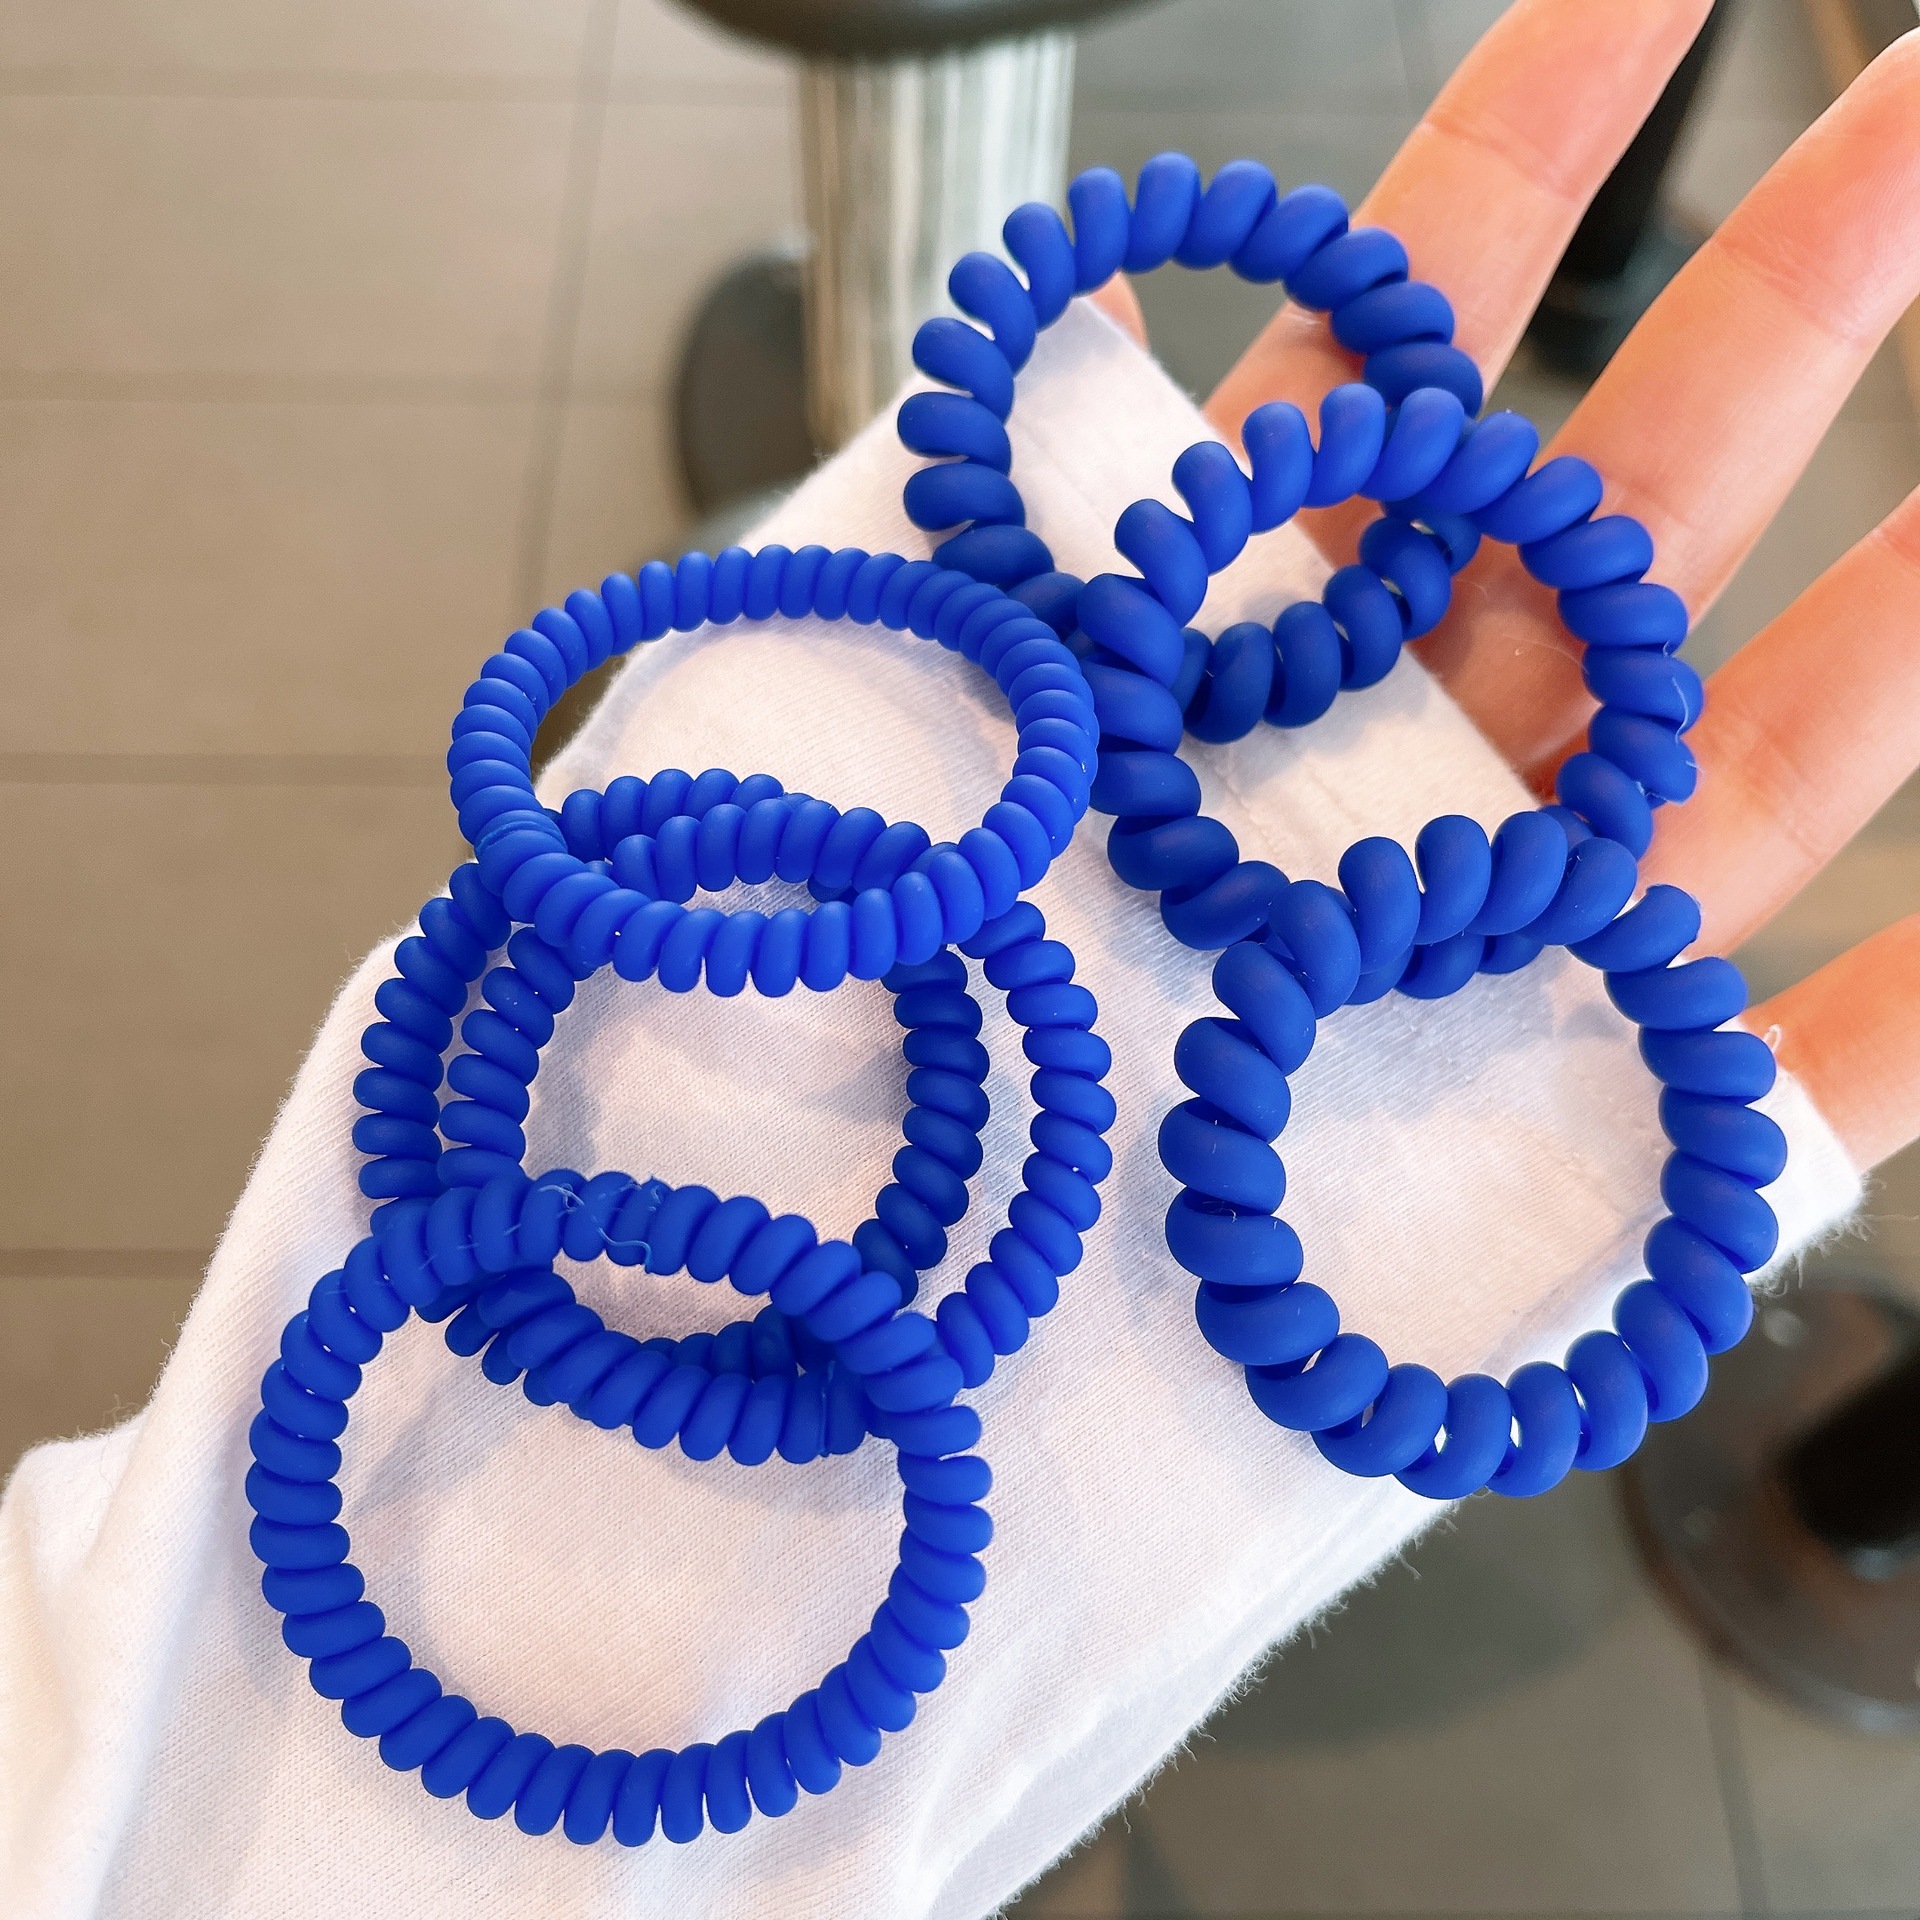 Korean Klein blue highelastic telephone wire hair ring frosted seamless head ropepicture3